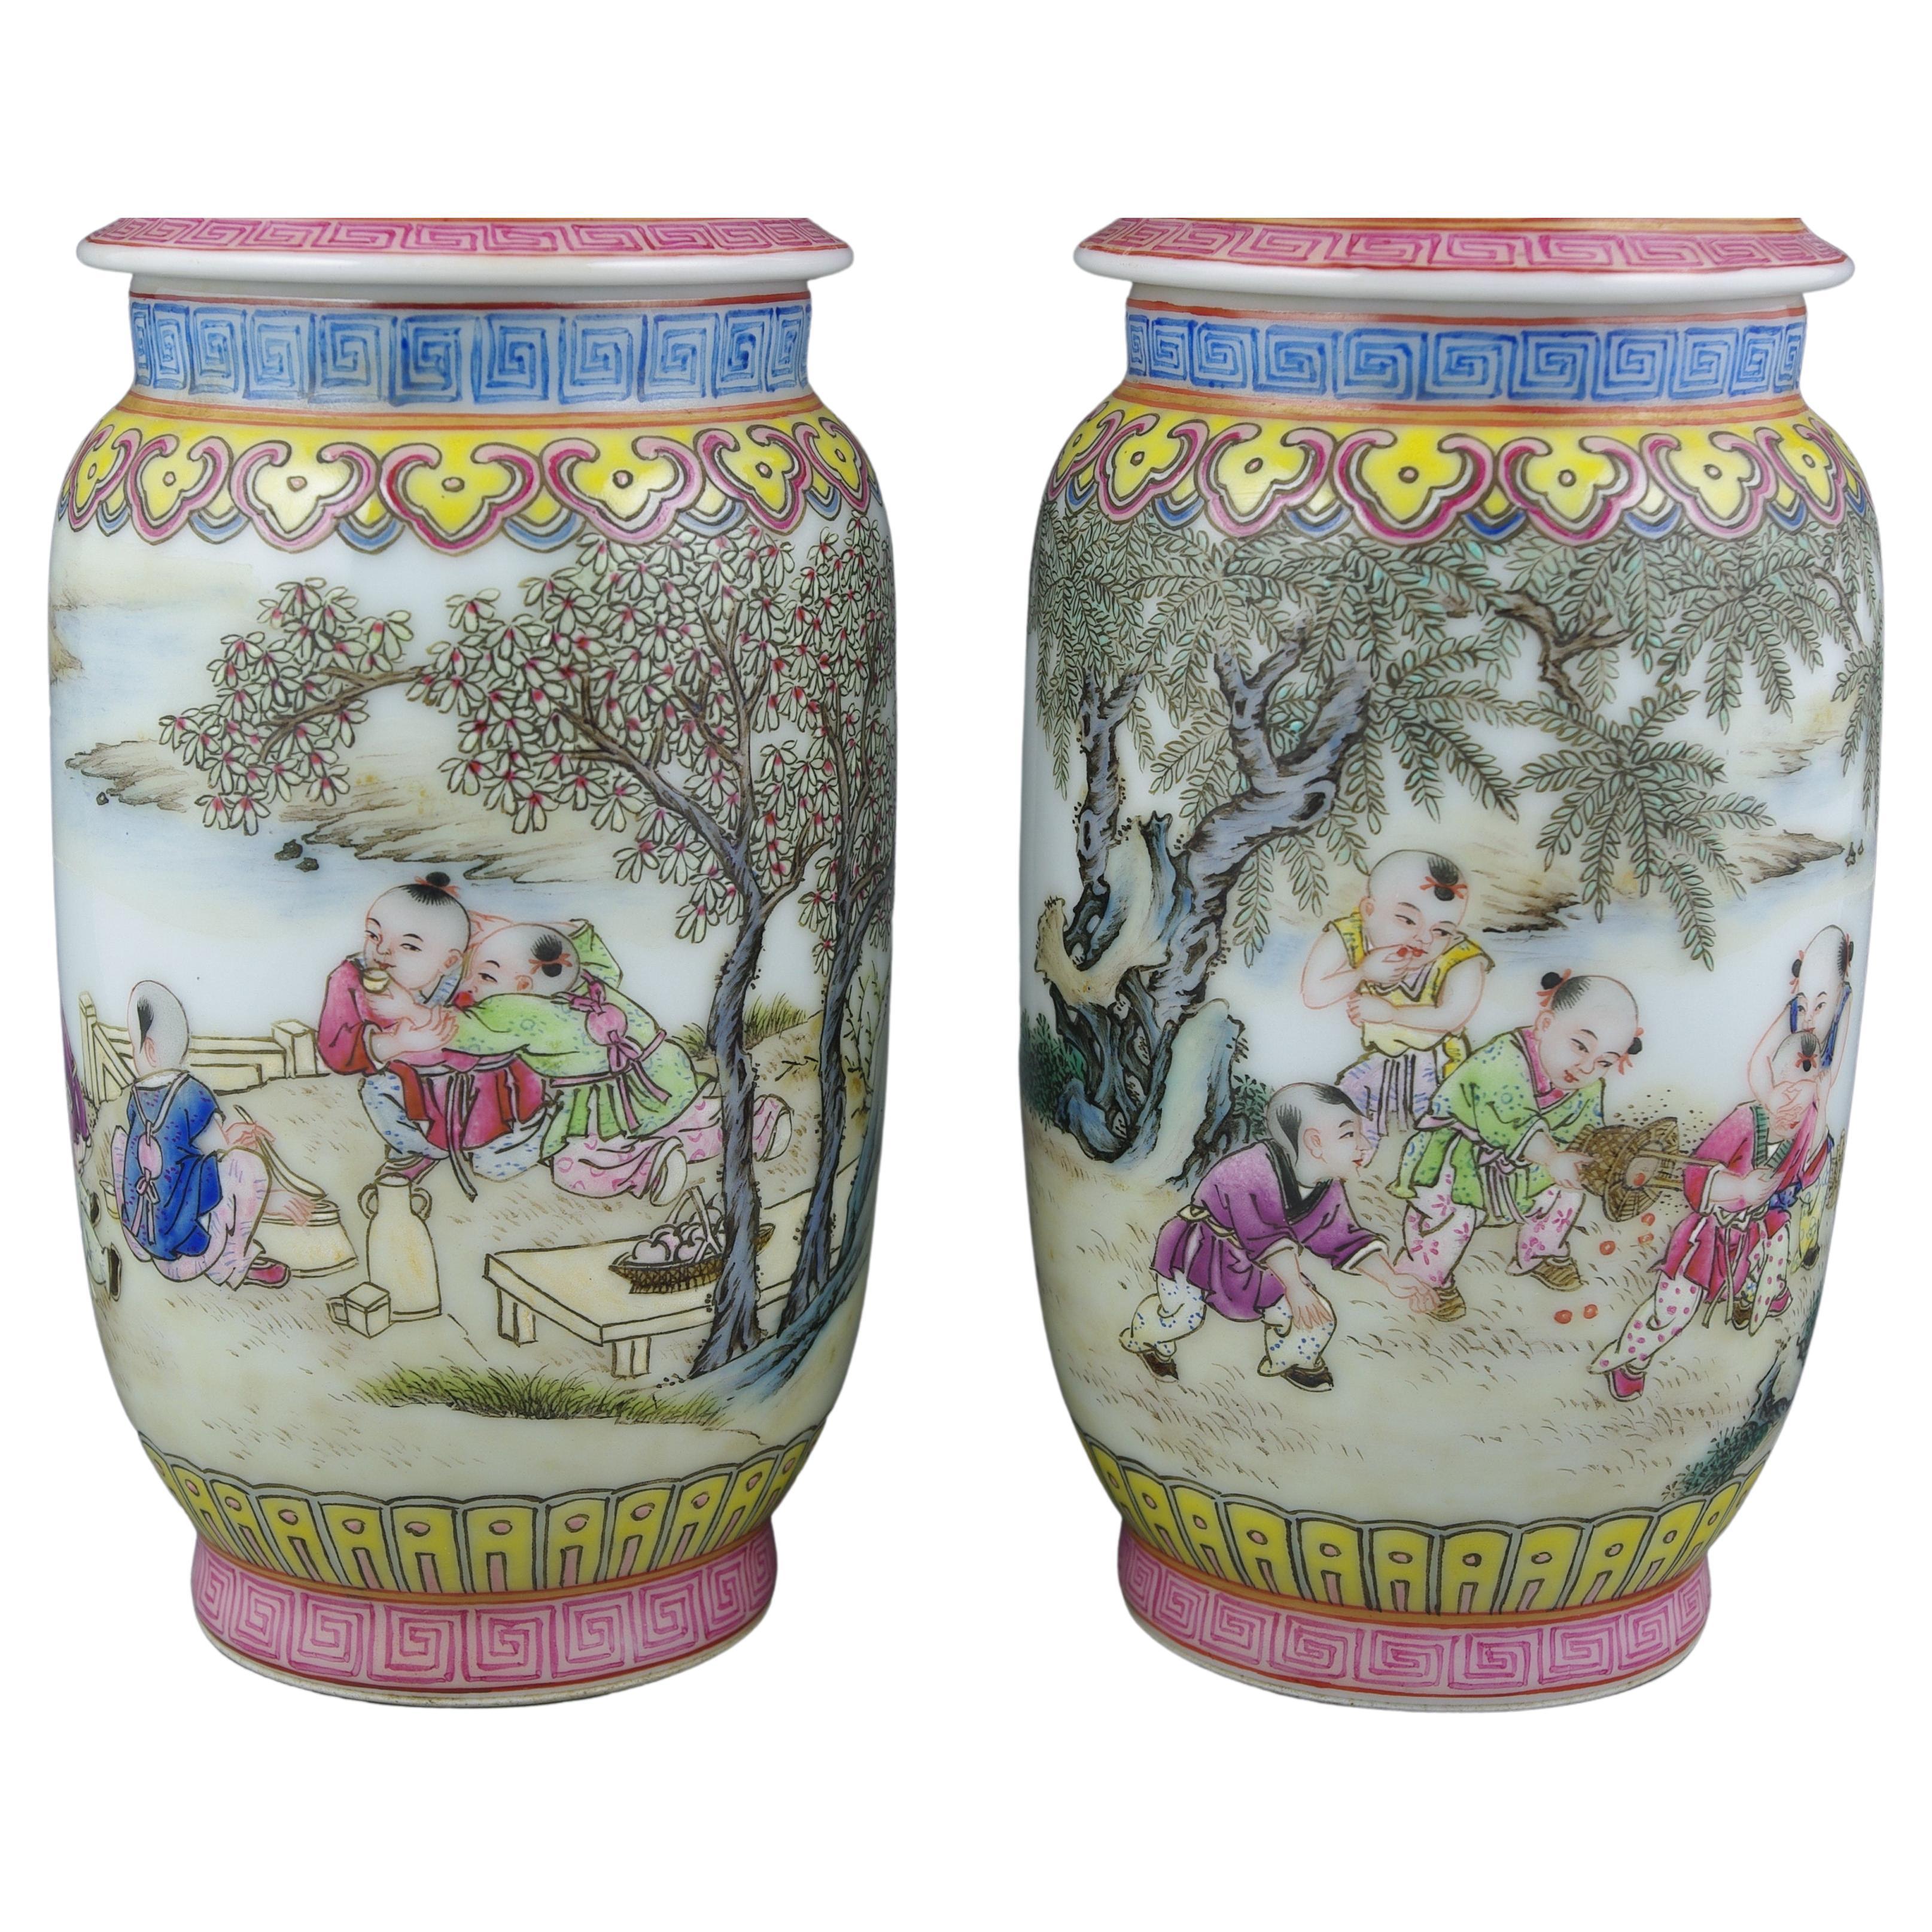 Finest Chinese Porcelain Fencai Covered Jars Children Playing Qing Style 20c  For Sale 3